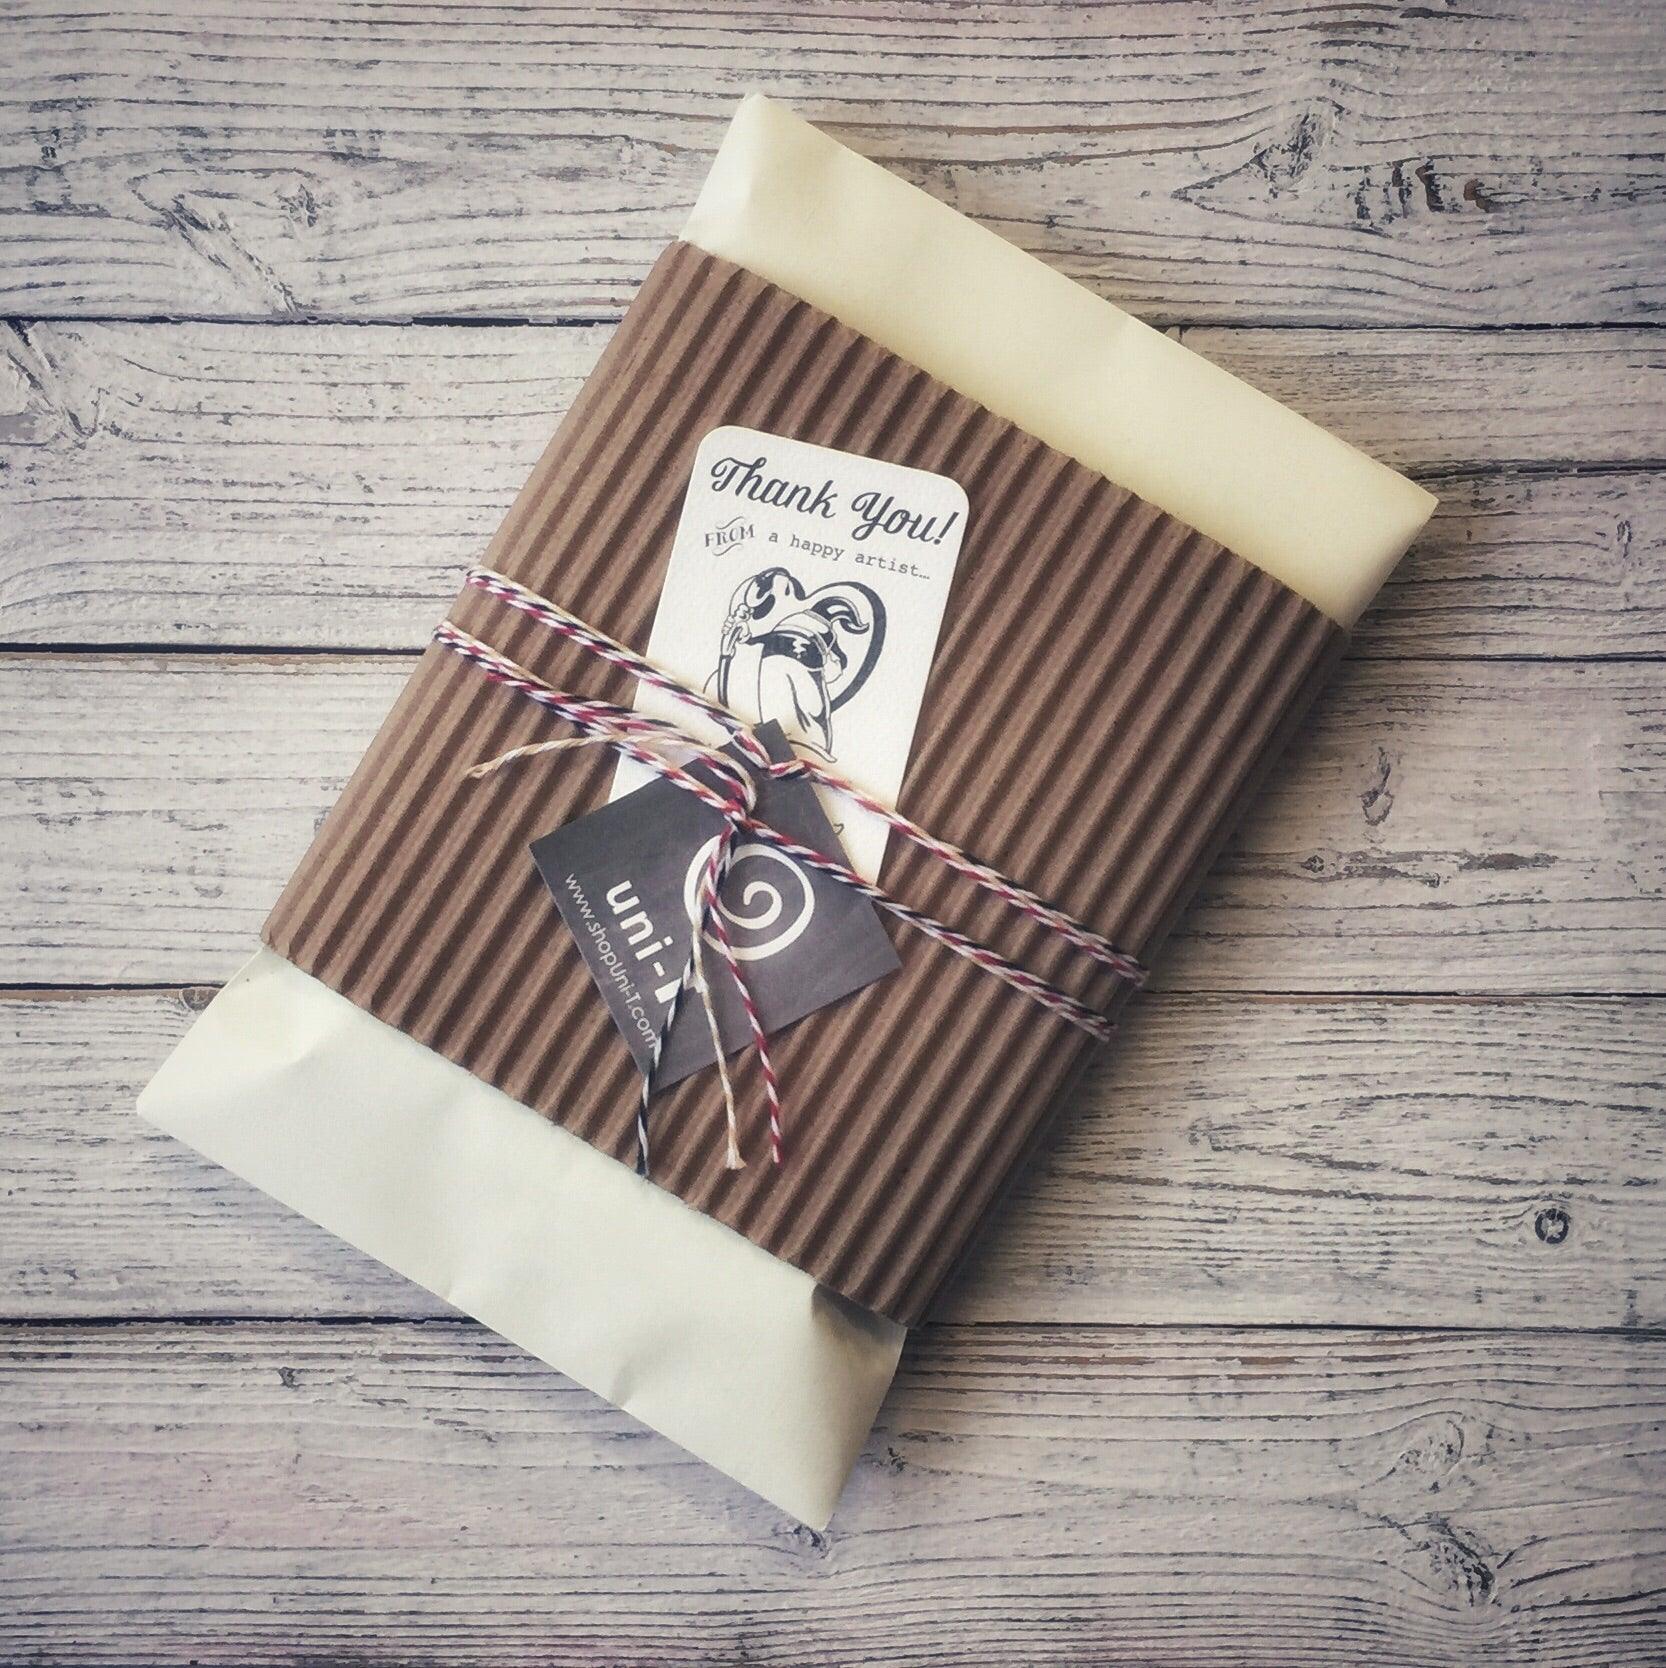 Eco-friendly Gift Packaging for T-shirts | Eco-conscious Packaging - Uni-T